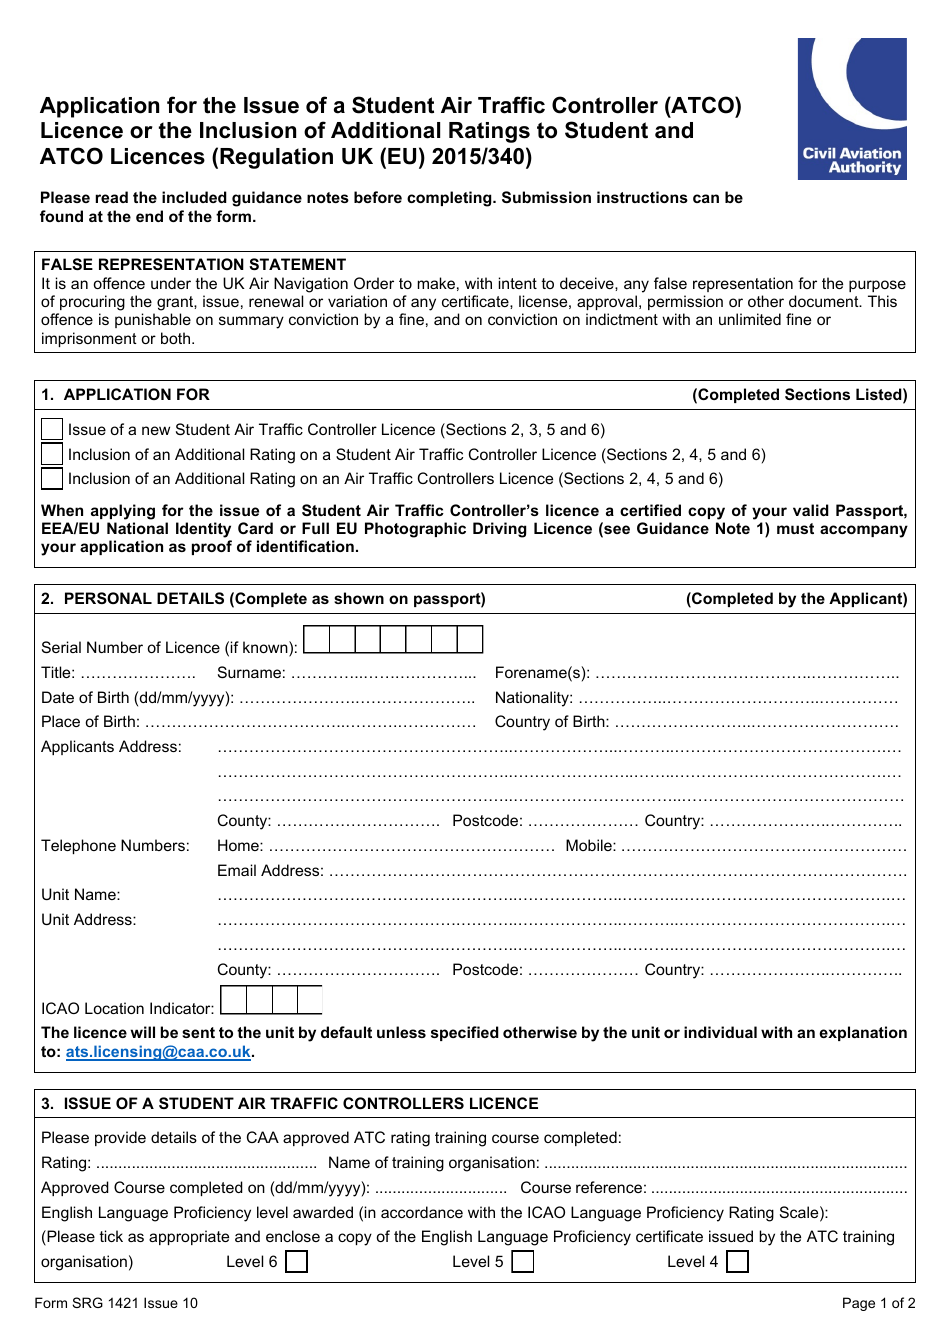 Form SRG1421 Application for the Issue of a Student Air Traffic Controller (Atco) Licence or the Inclusion of Additional Ratings to Student and Atco Licences (Regulation UK (Eu) 2015 / 340) - United Kingdom, Page 1